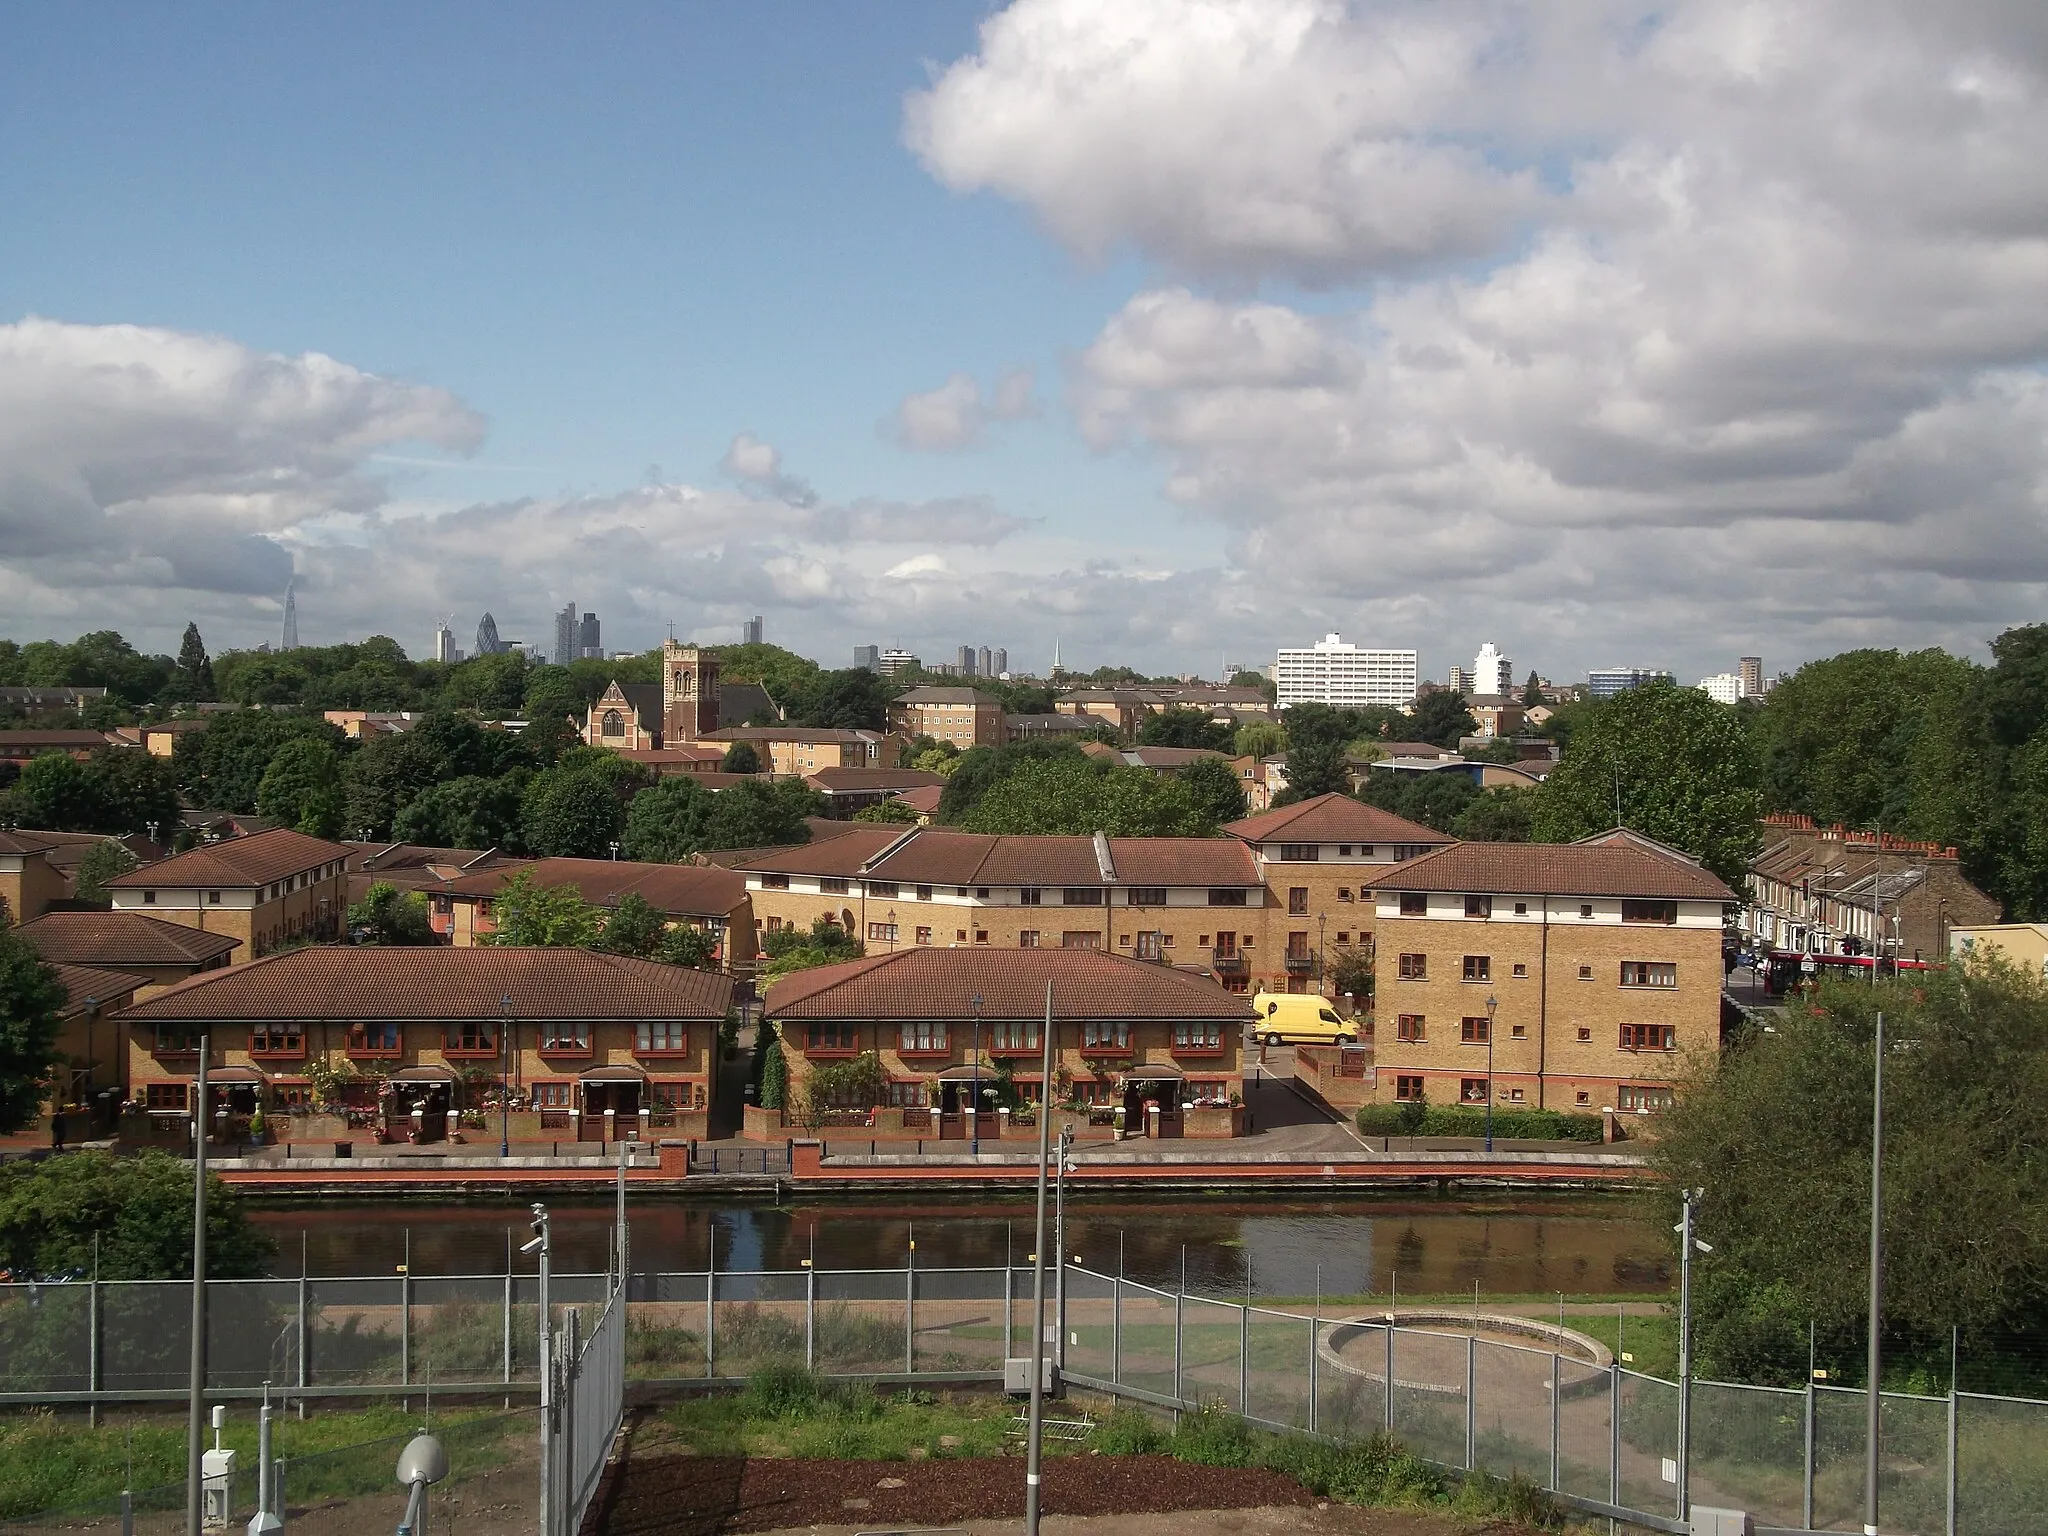 Photo showing: Housing in Hackney Wick. Foreground from left to right: Silk Mills Square; Moat House and Meadow Close. In the distance the skyscrapers in the City of London can be seen, in front of which the tower and gable wall of the church (distinctive red and yellow) belong to St Mary's of Eton, Hackney Wick which won the RIBA architecture award, 2015.